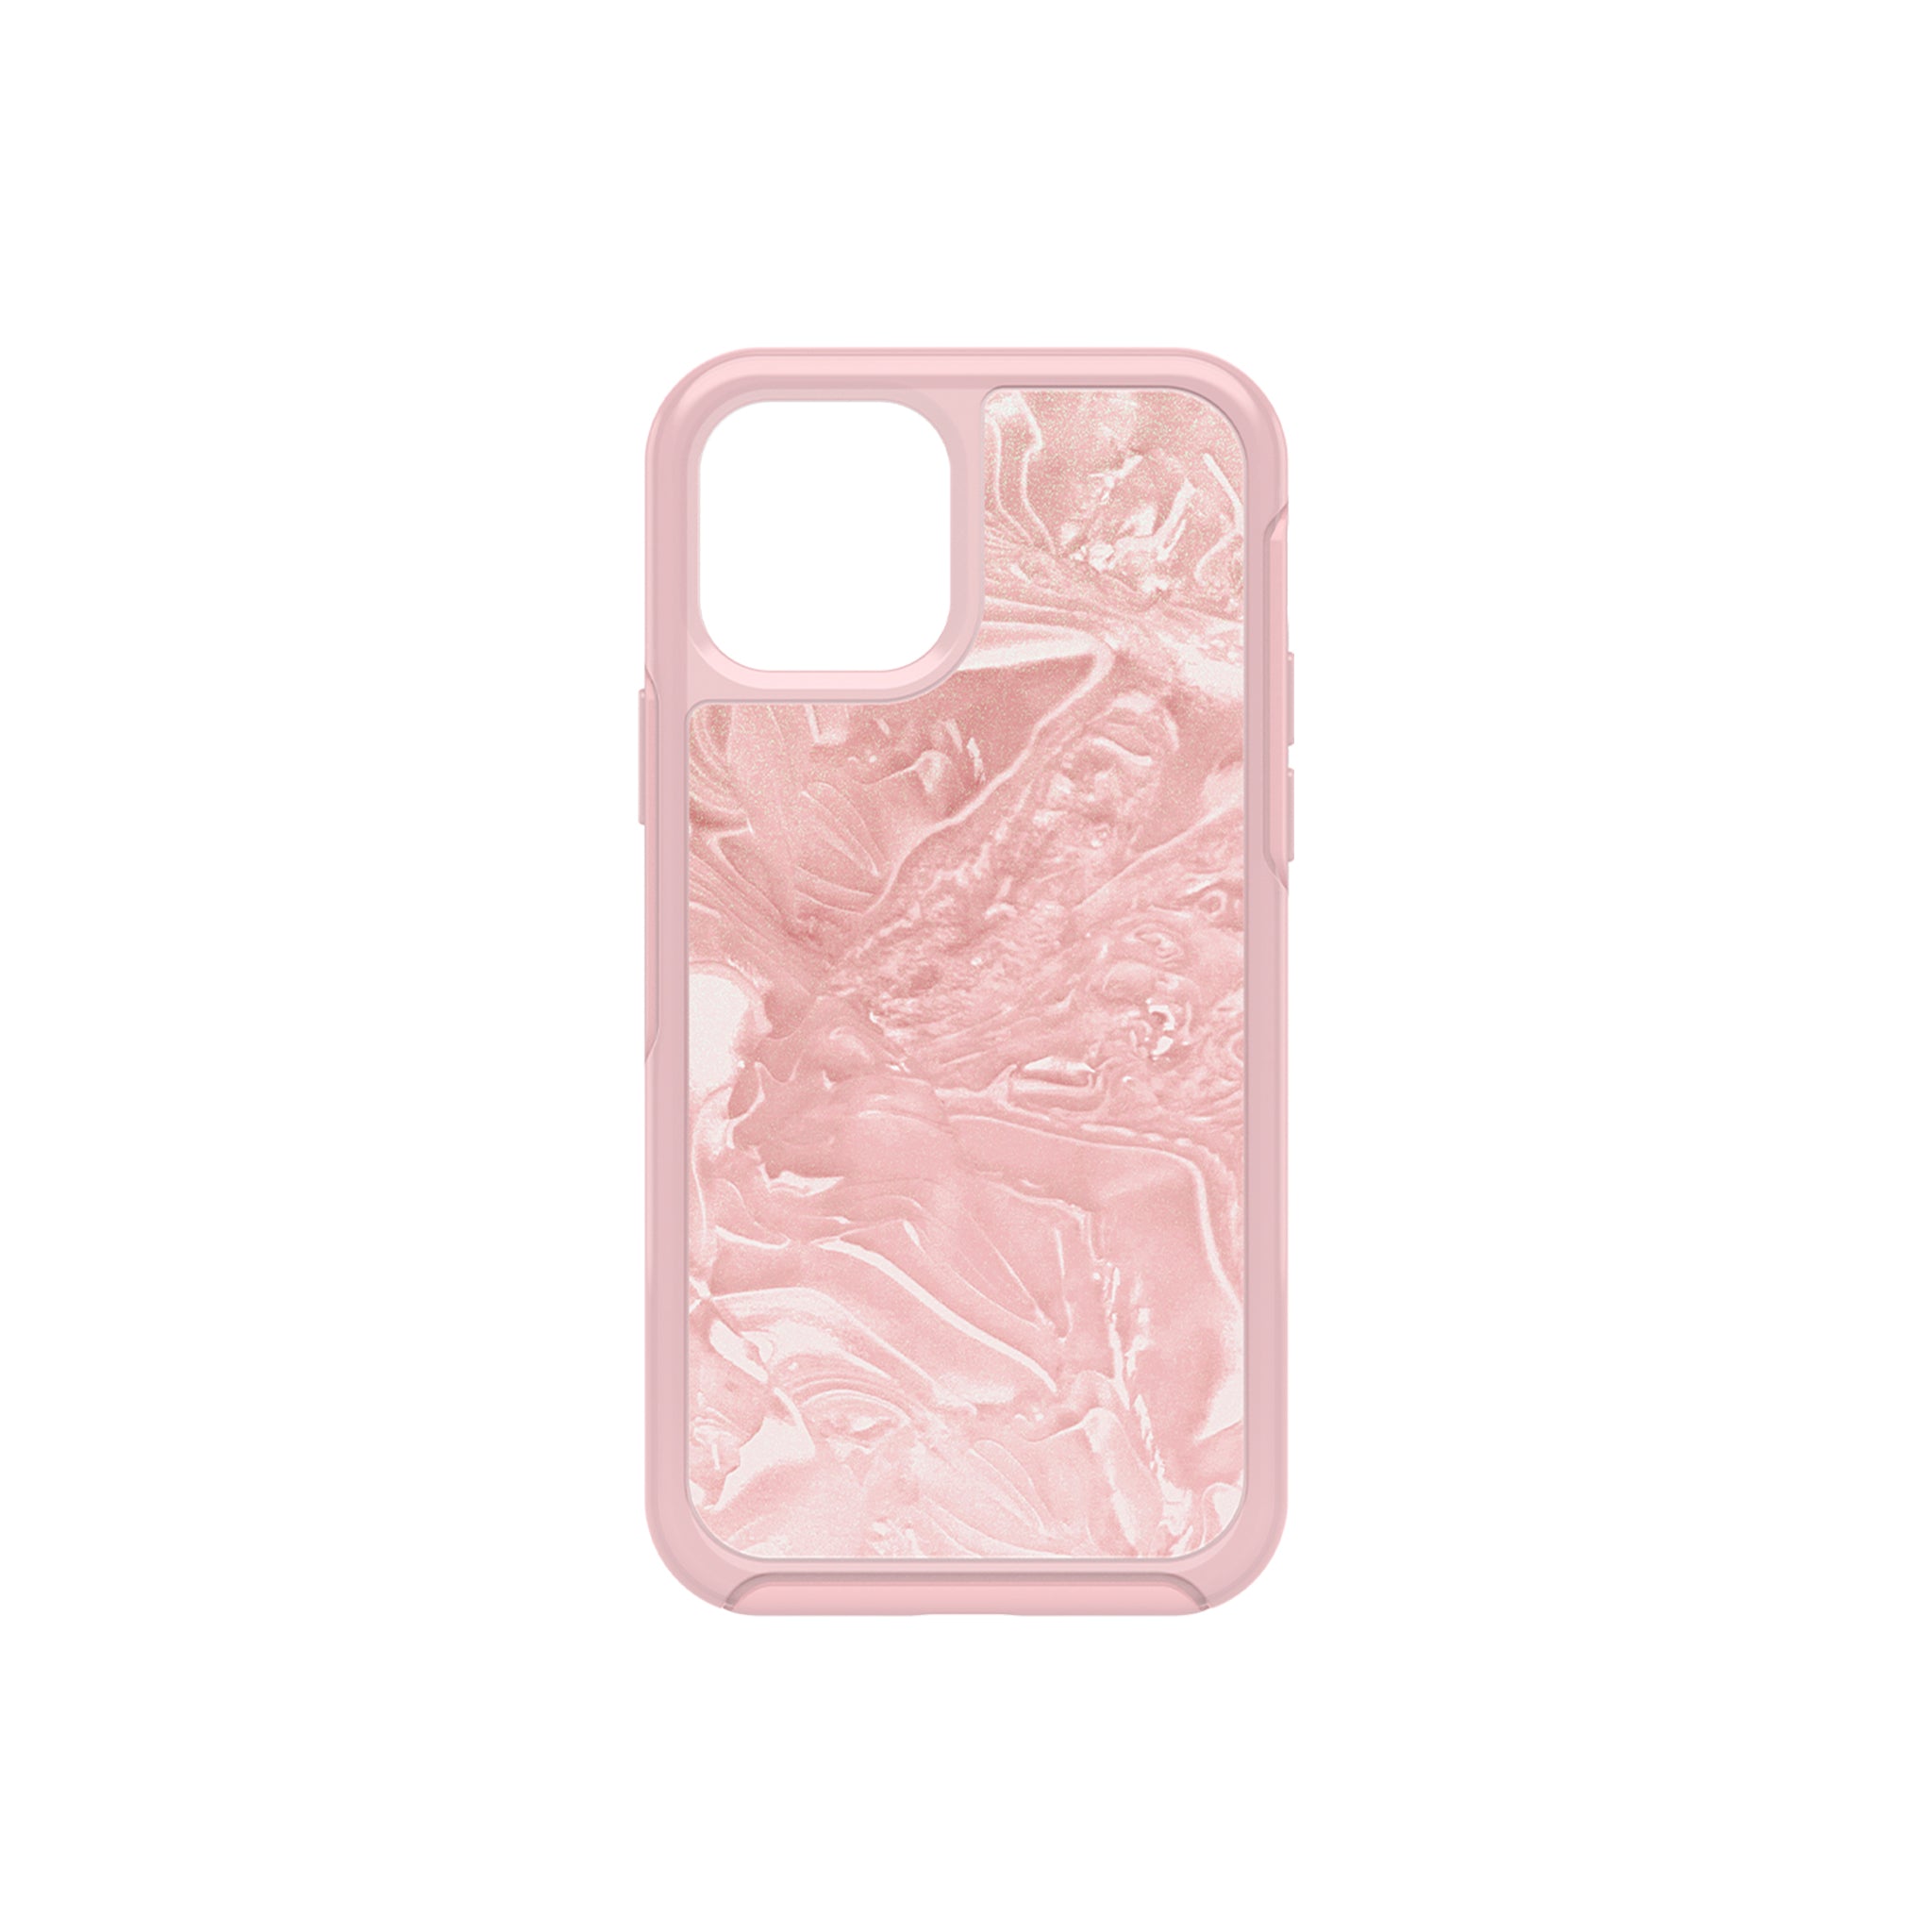 OtterBox - Symmetry Clear for Iphone 12/12 Pro - SHELL SHOCKED